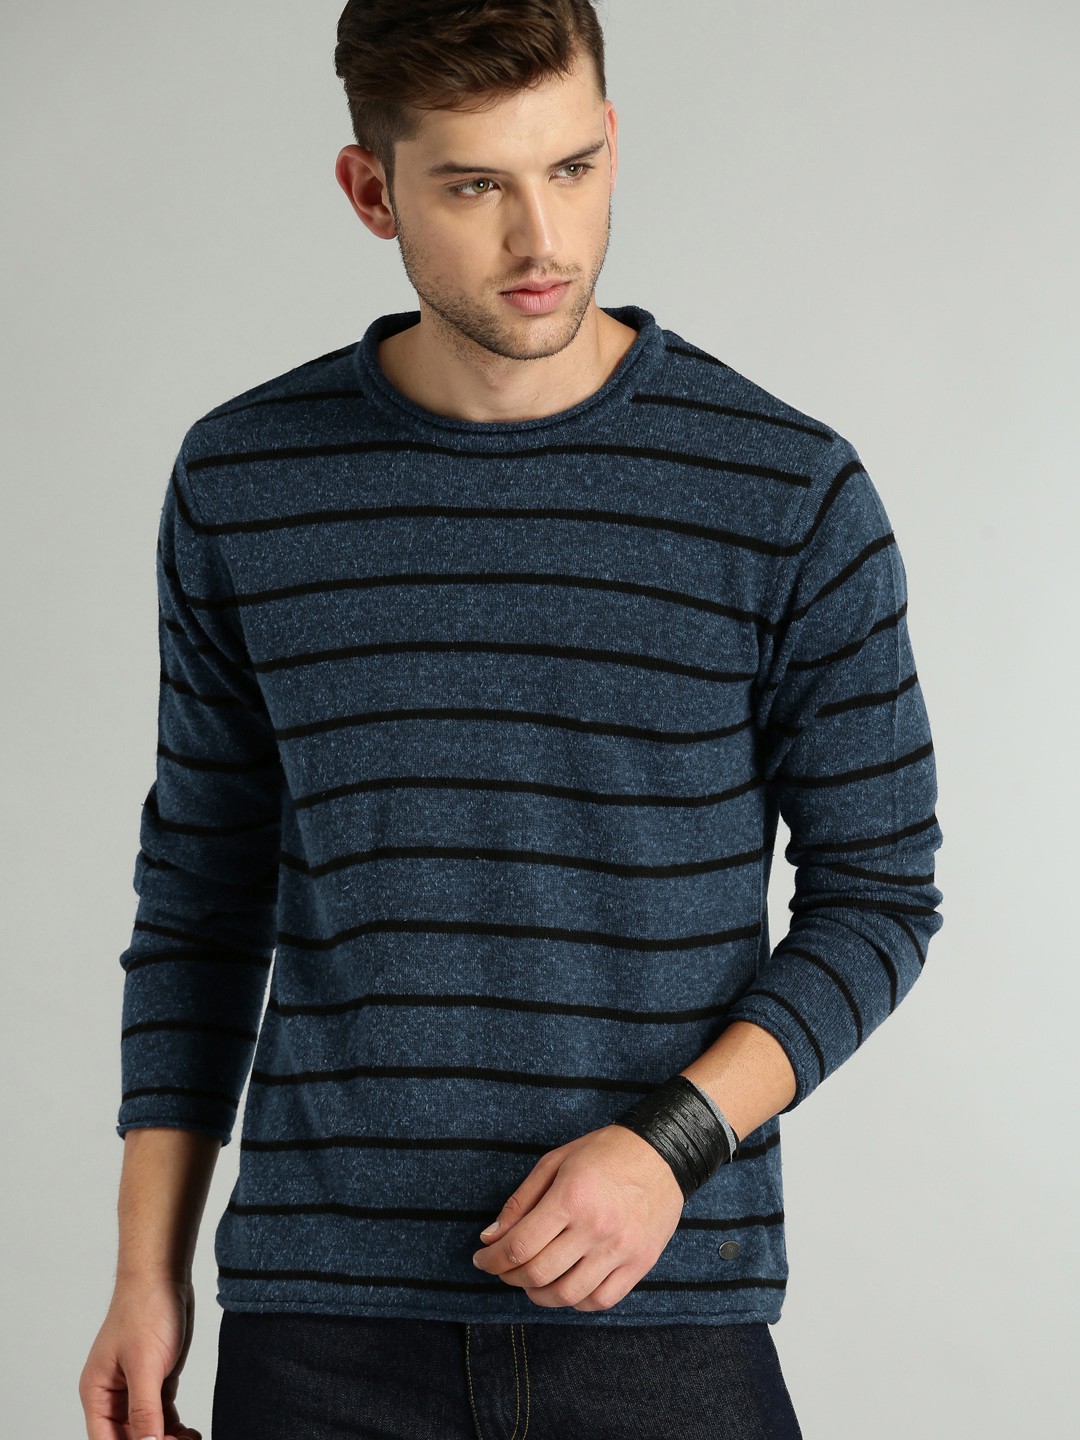 Roadster Exclusive  sweater brands in india